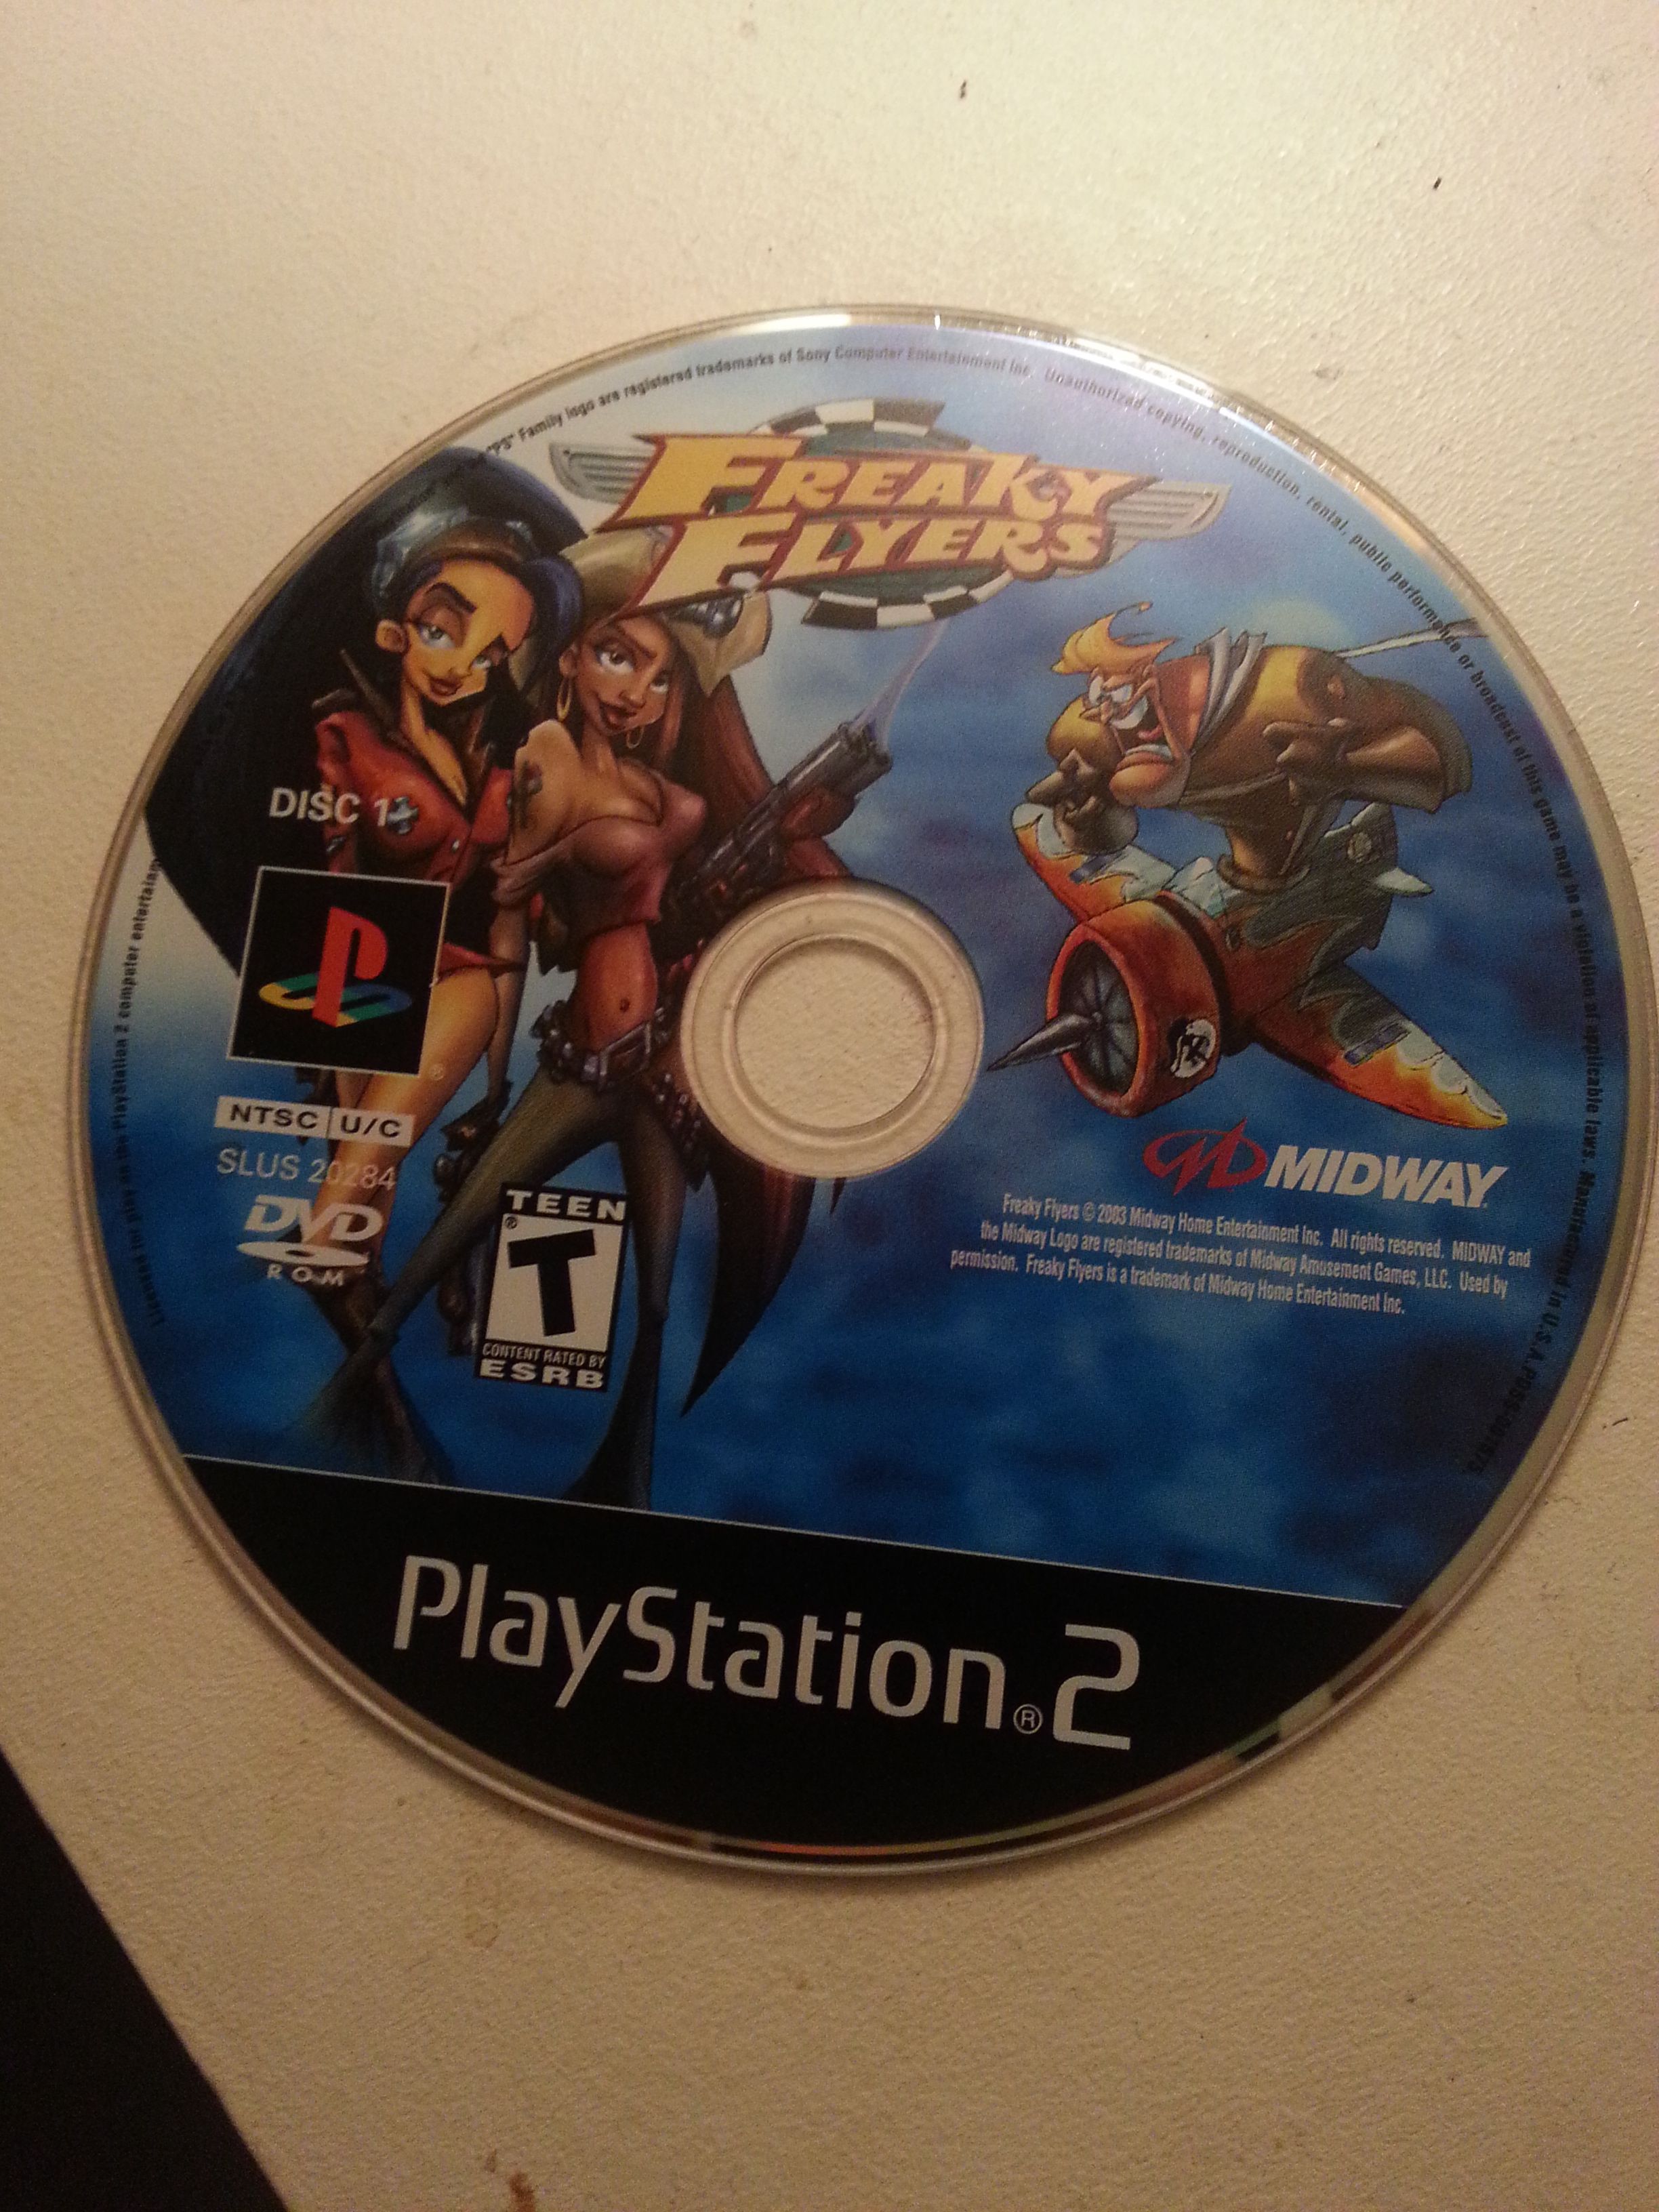 PS2 PlayStation 2 Freaky Flyers